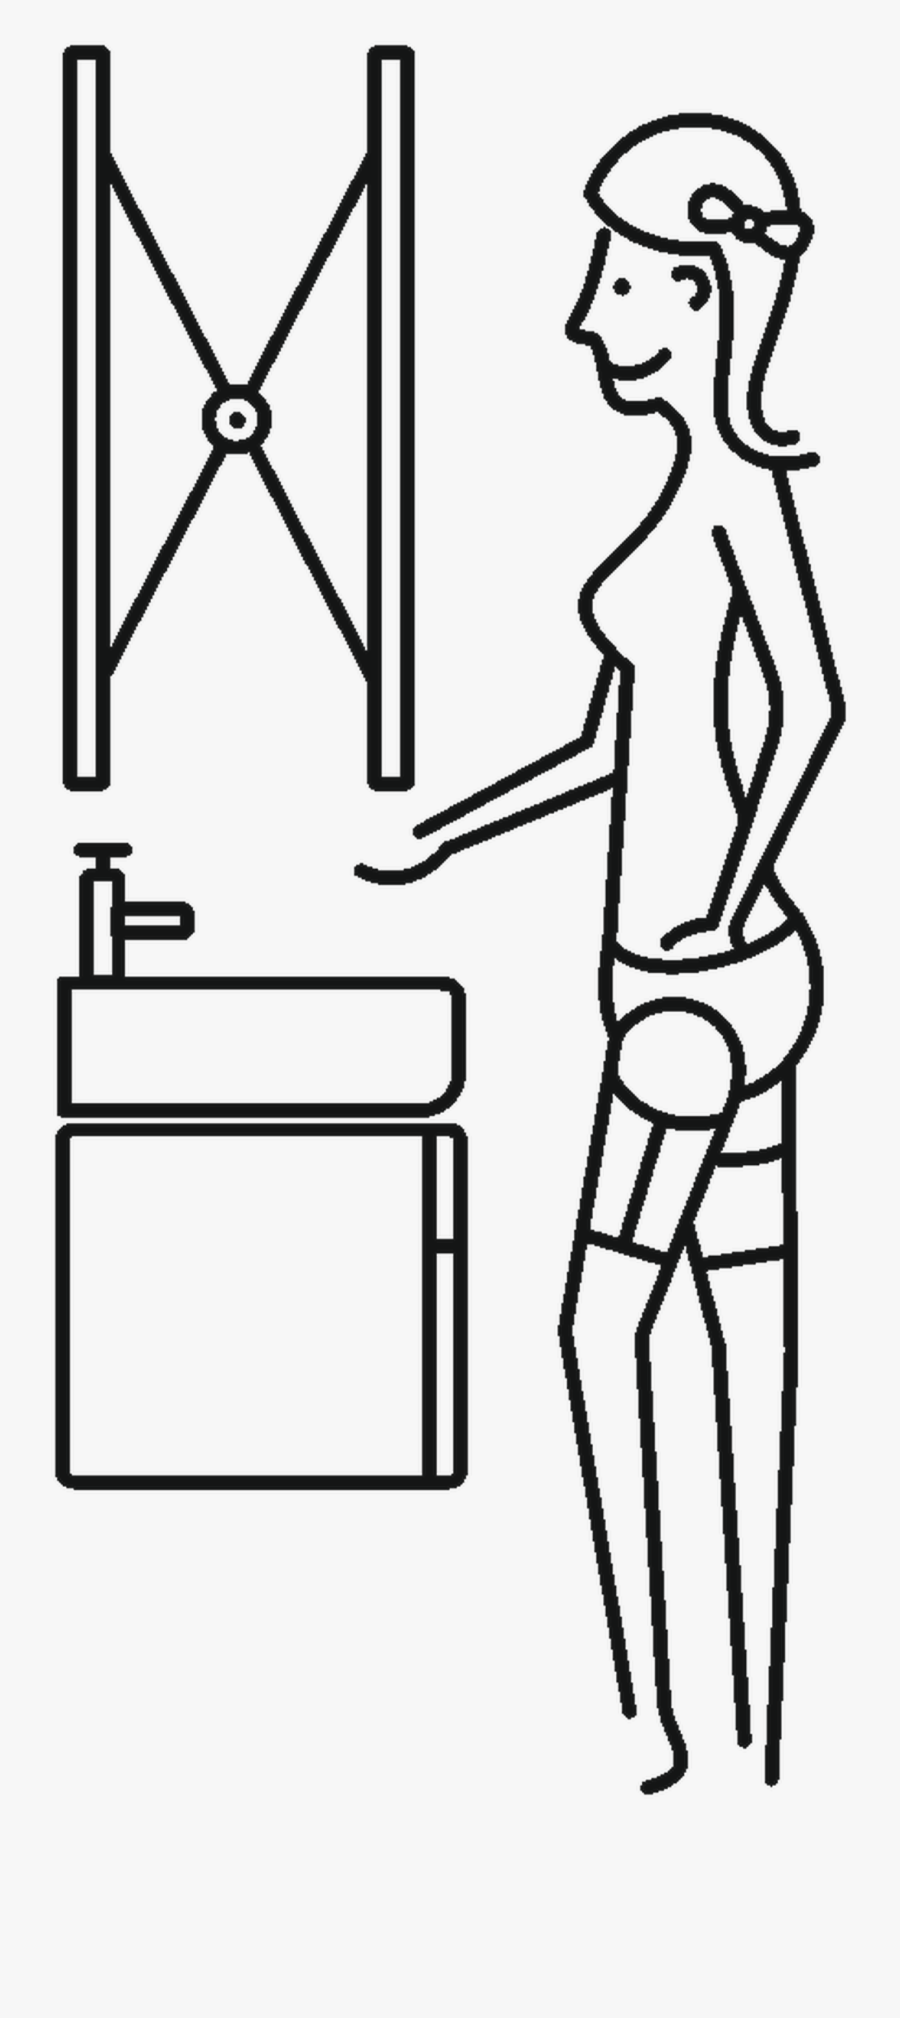 Basic Activities Performed In Front Of A Mirror Now - Mirror, Transparent Clipart